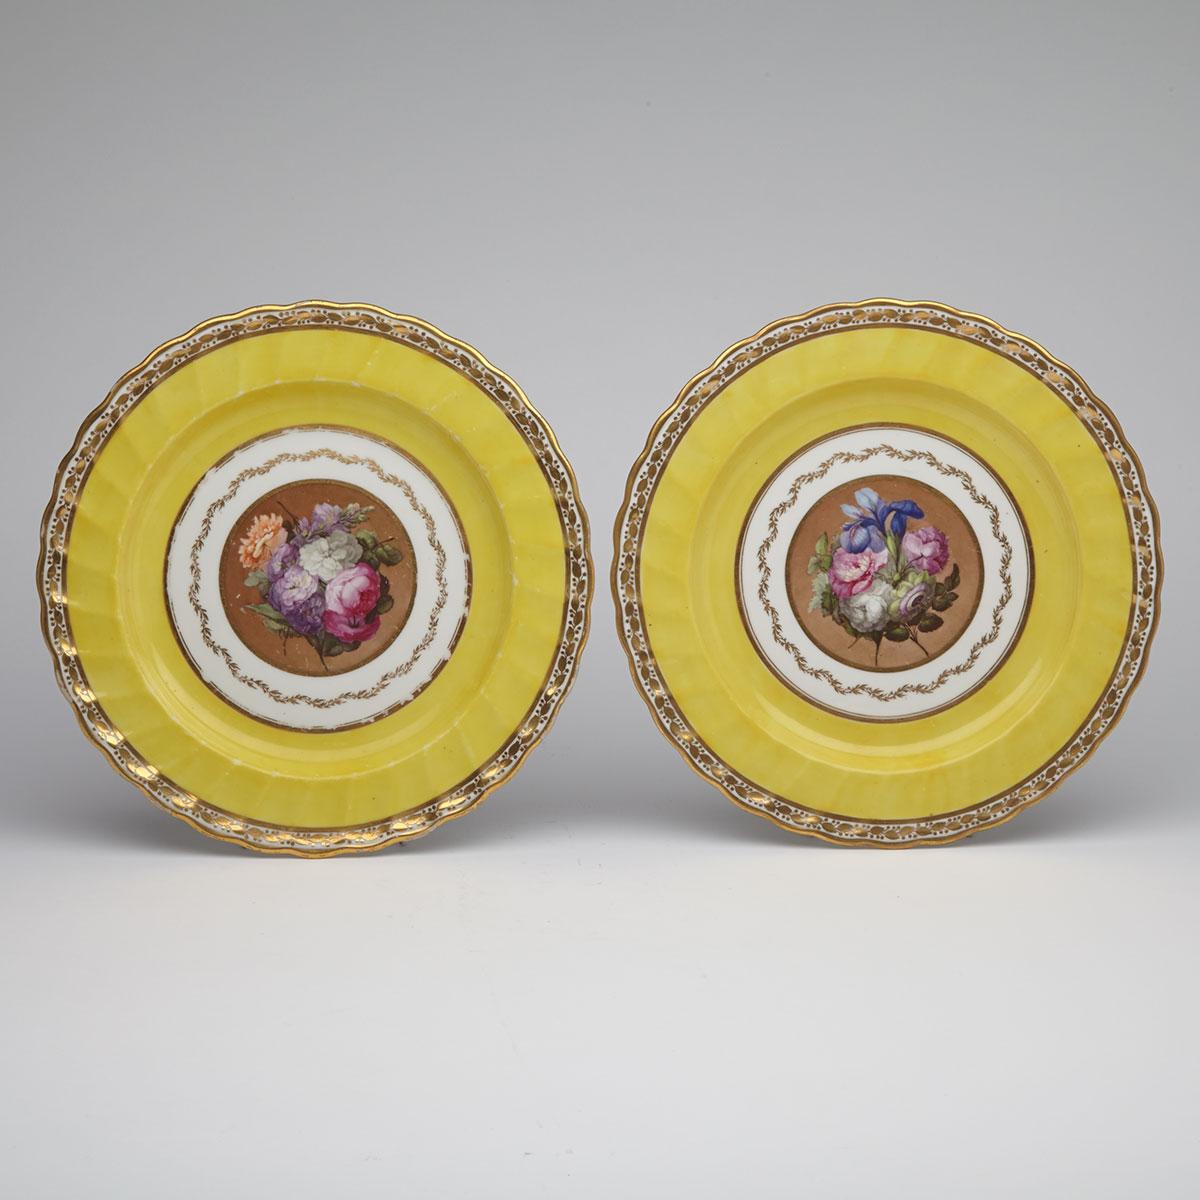 Pair of Derby Yellow Ground Plates, c.1795-1800